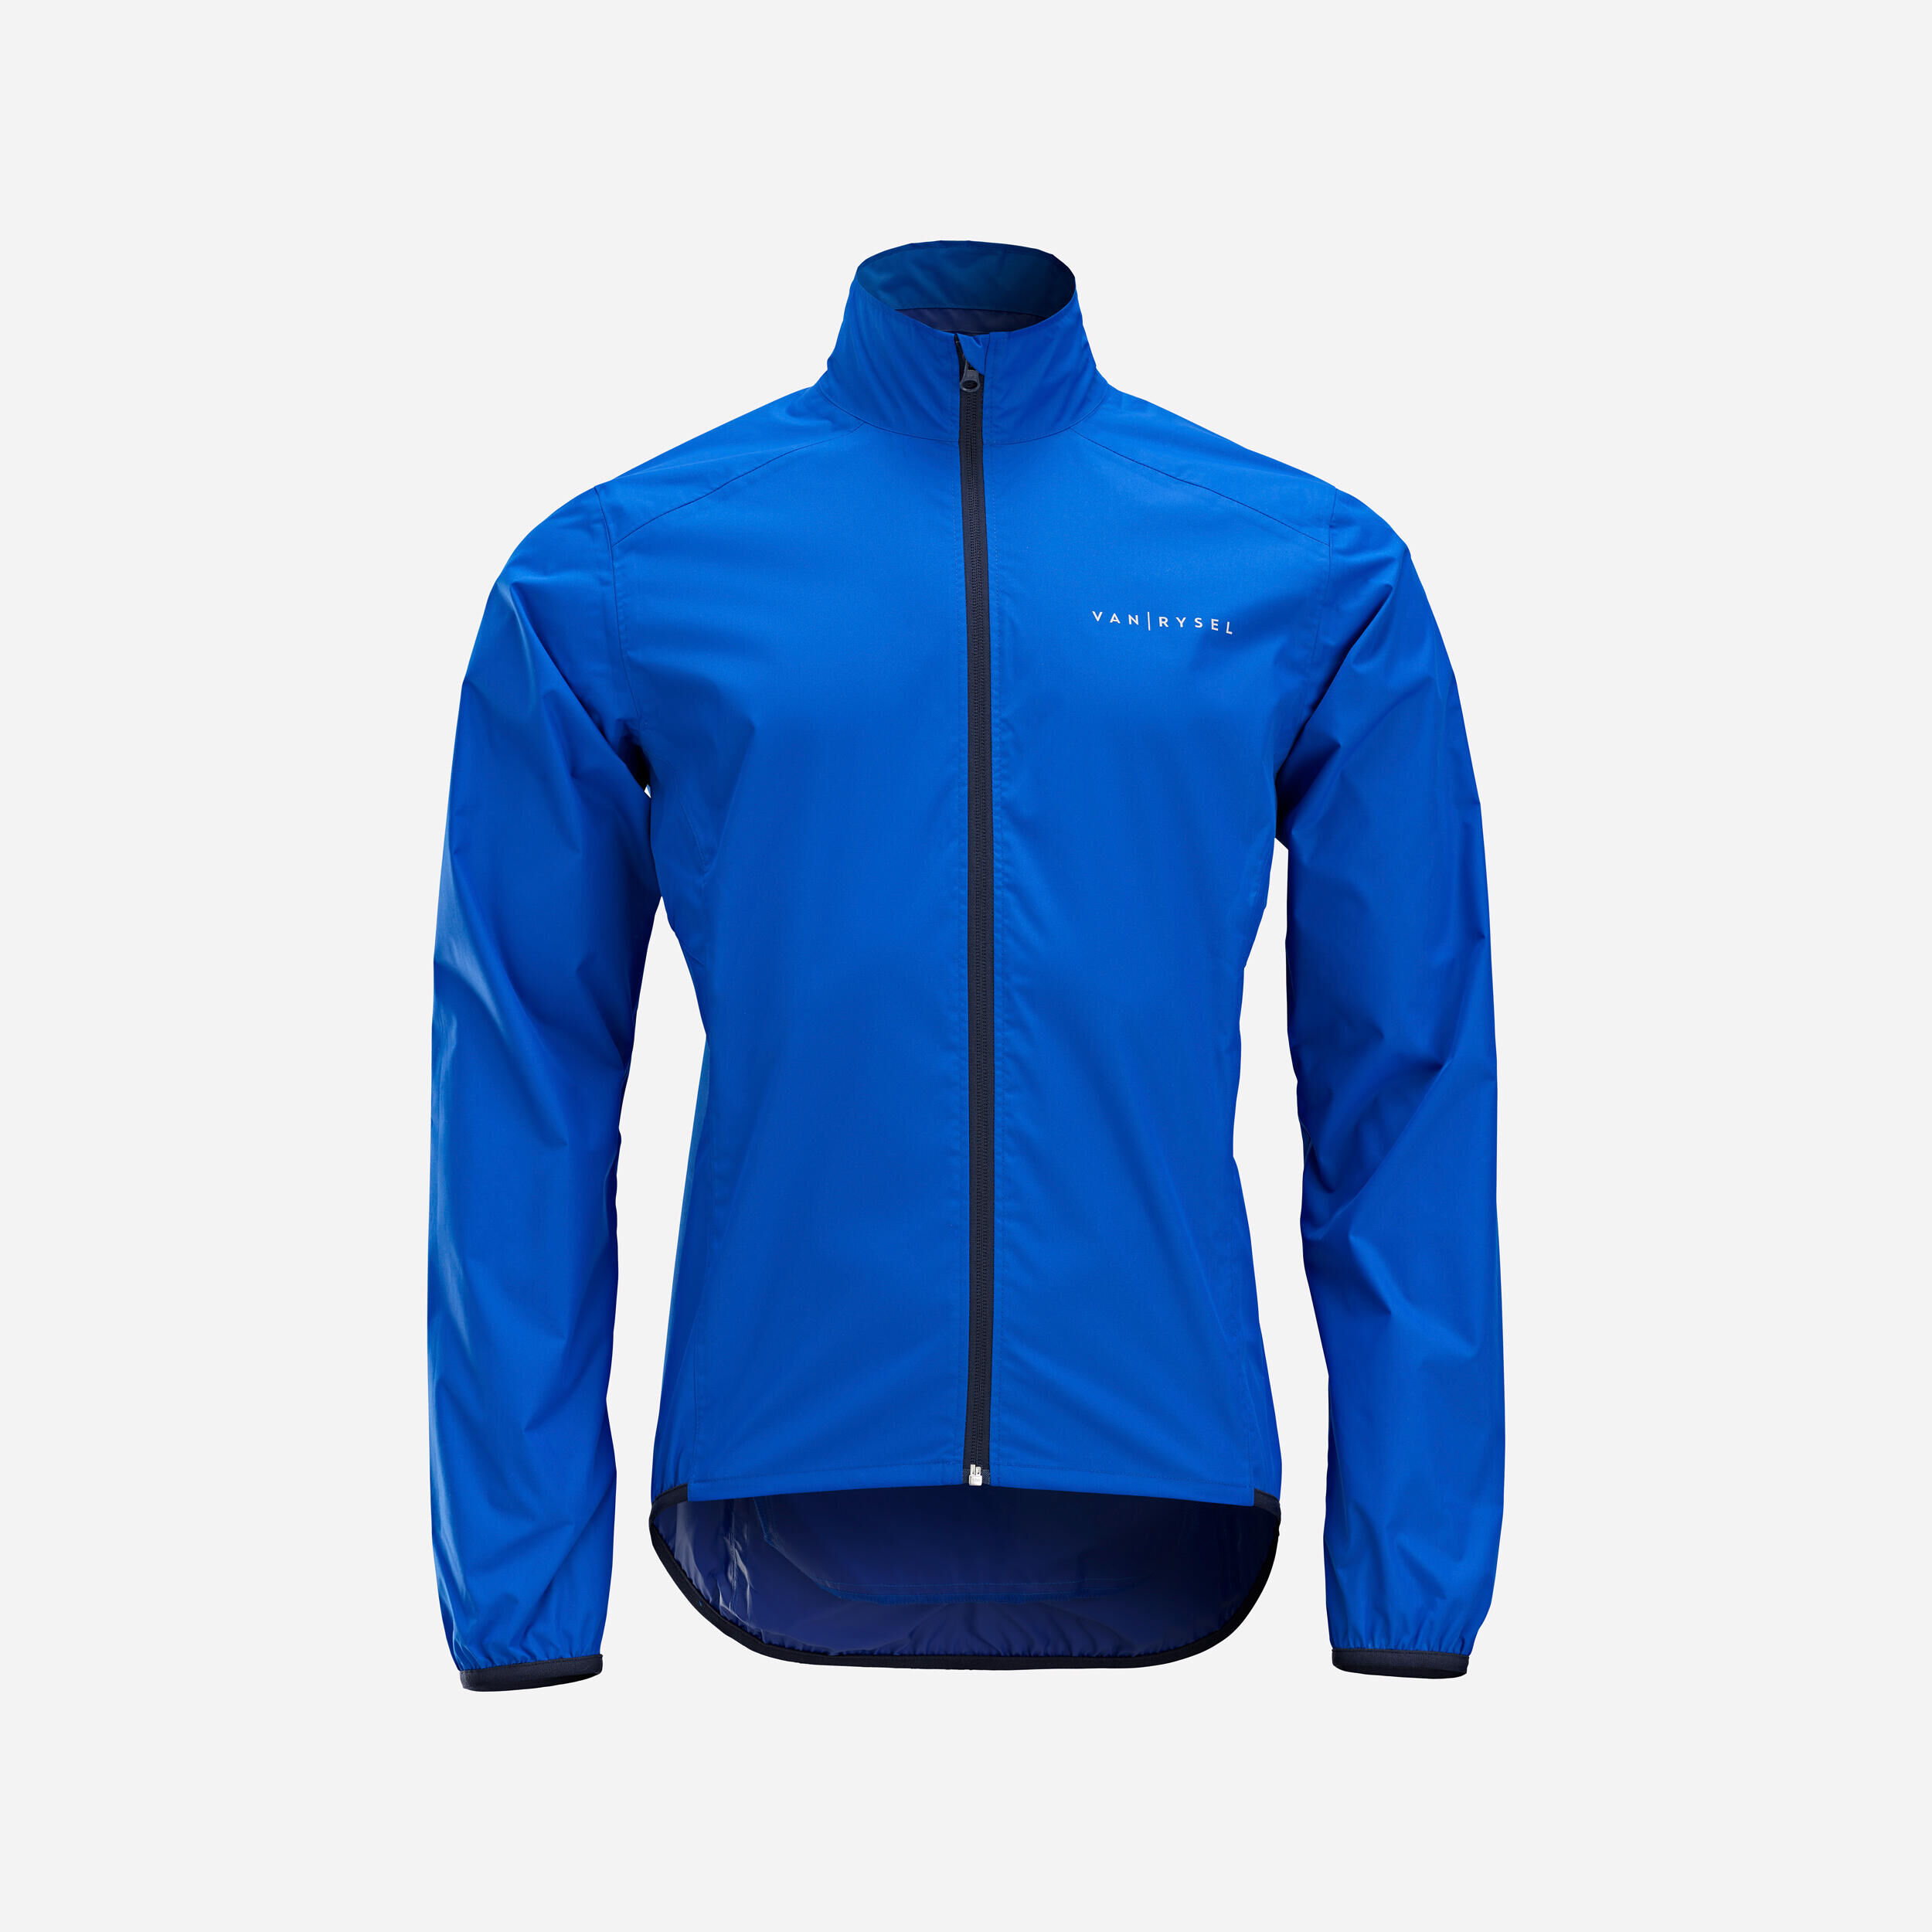 Fdx Arch Men's Blue Windproof & Water Resistant Cycling Jacket